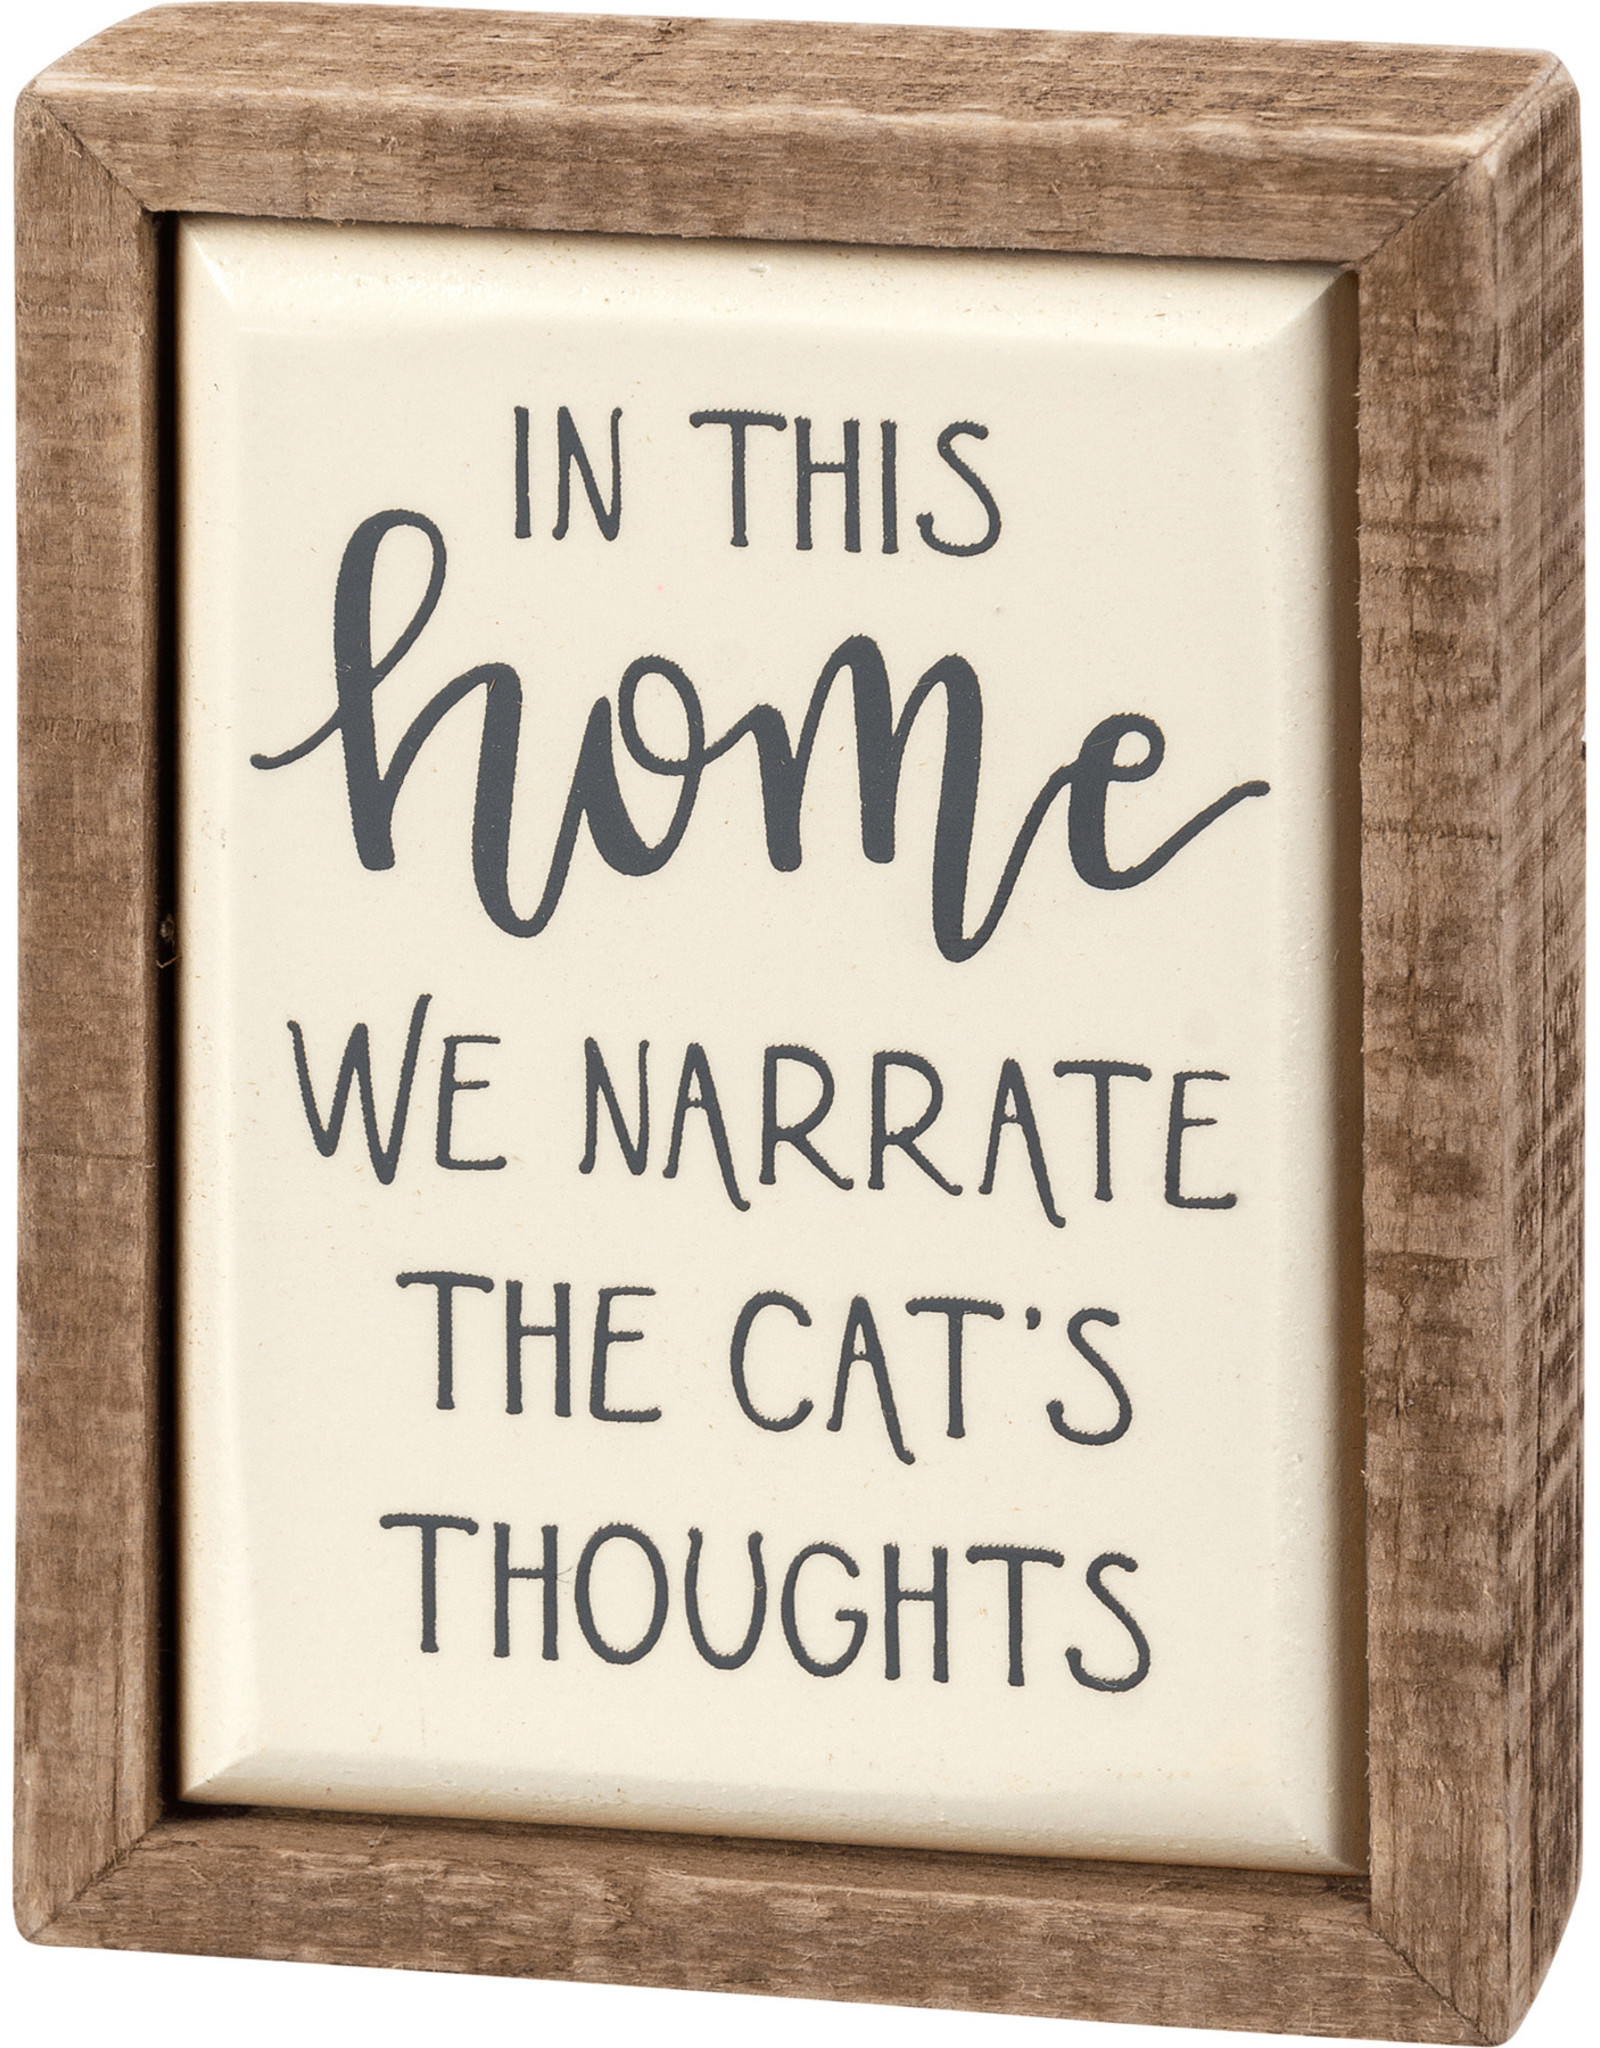 Box Sign Mini - Narrate The Cat's Thoughts